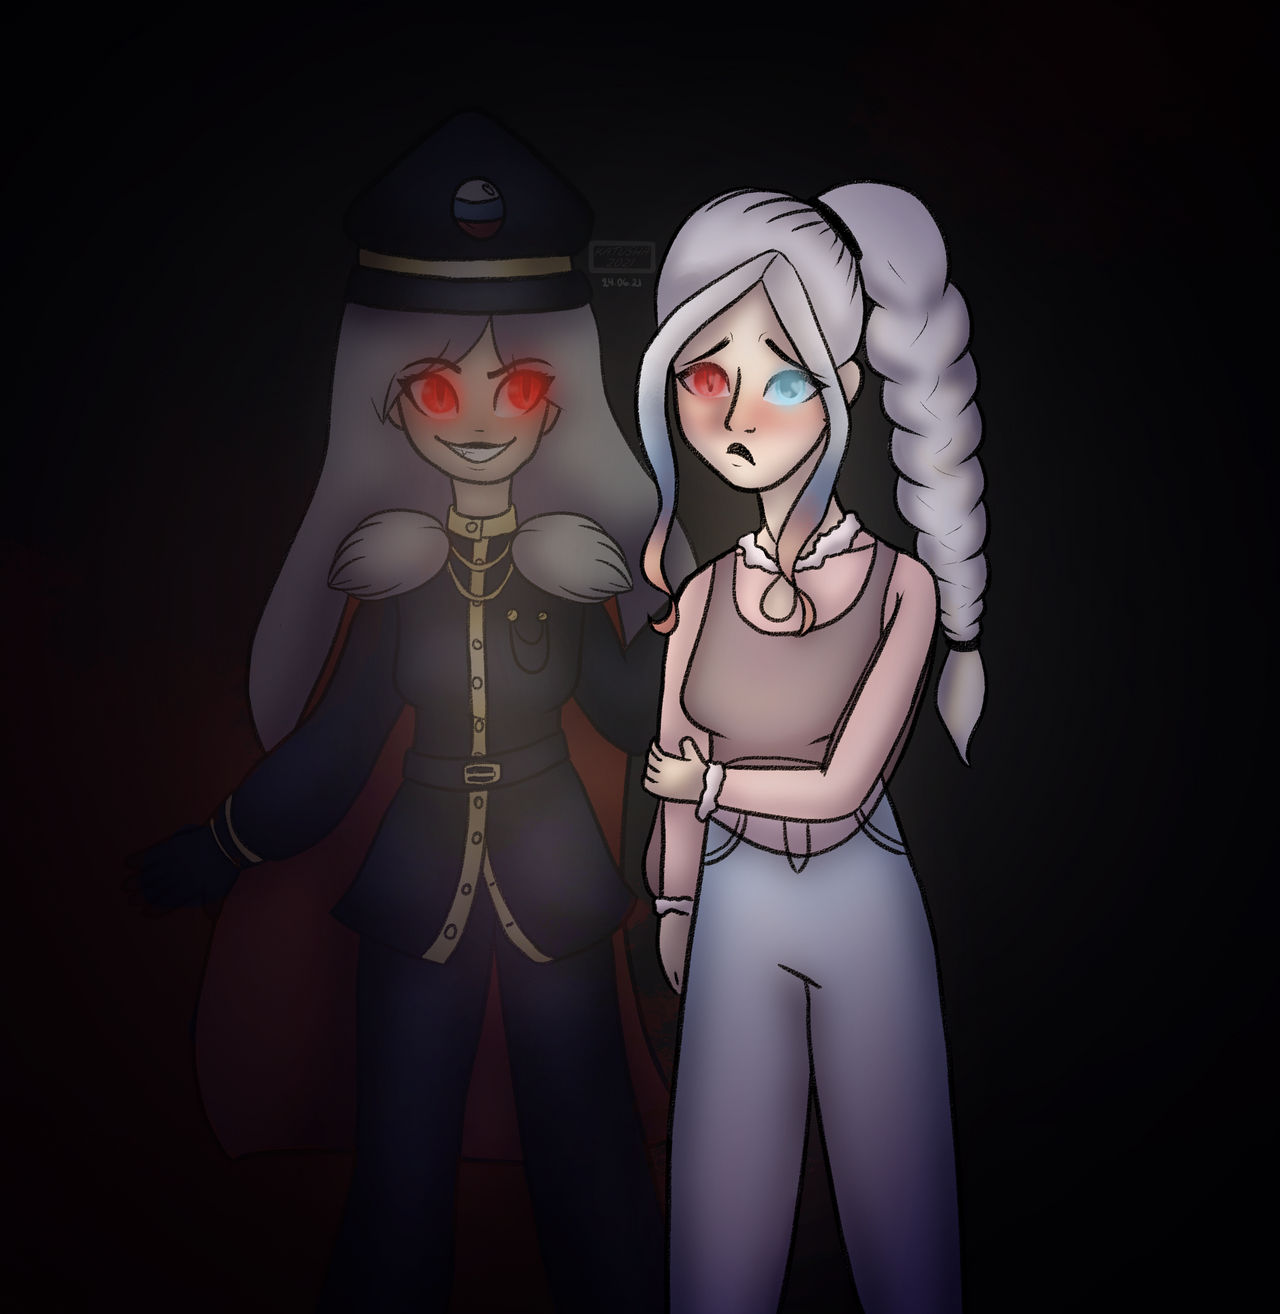 Russia (countryhumans) by KZK82 on DeviantArt